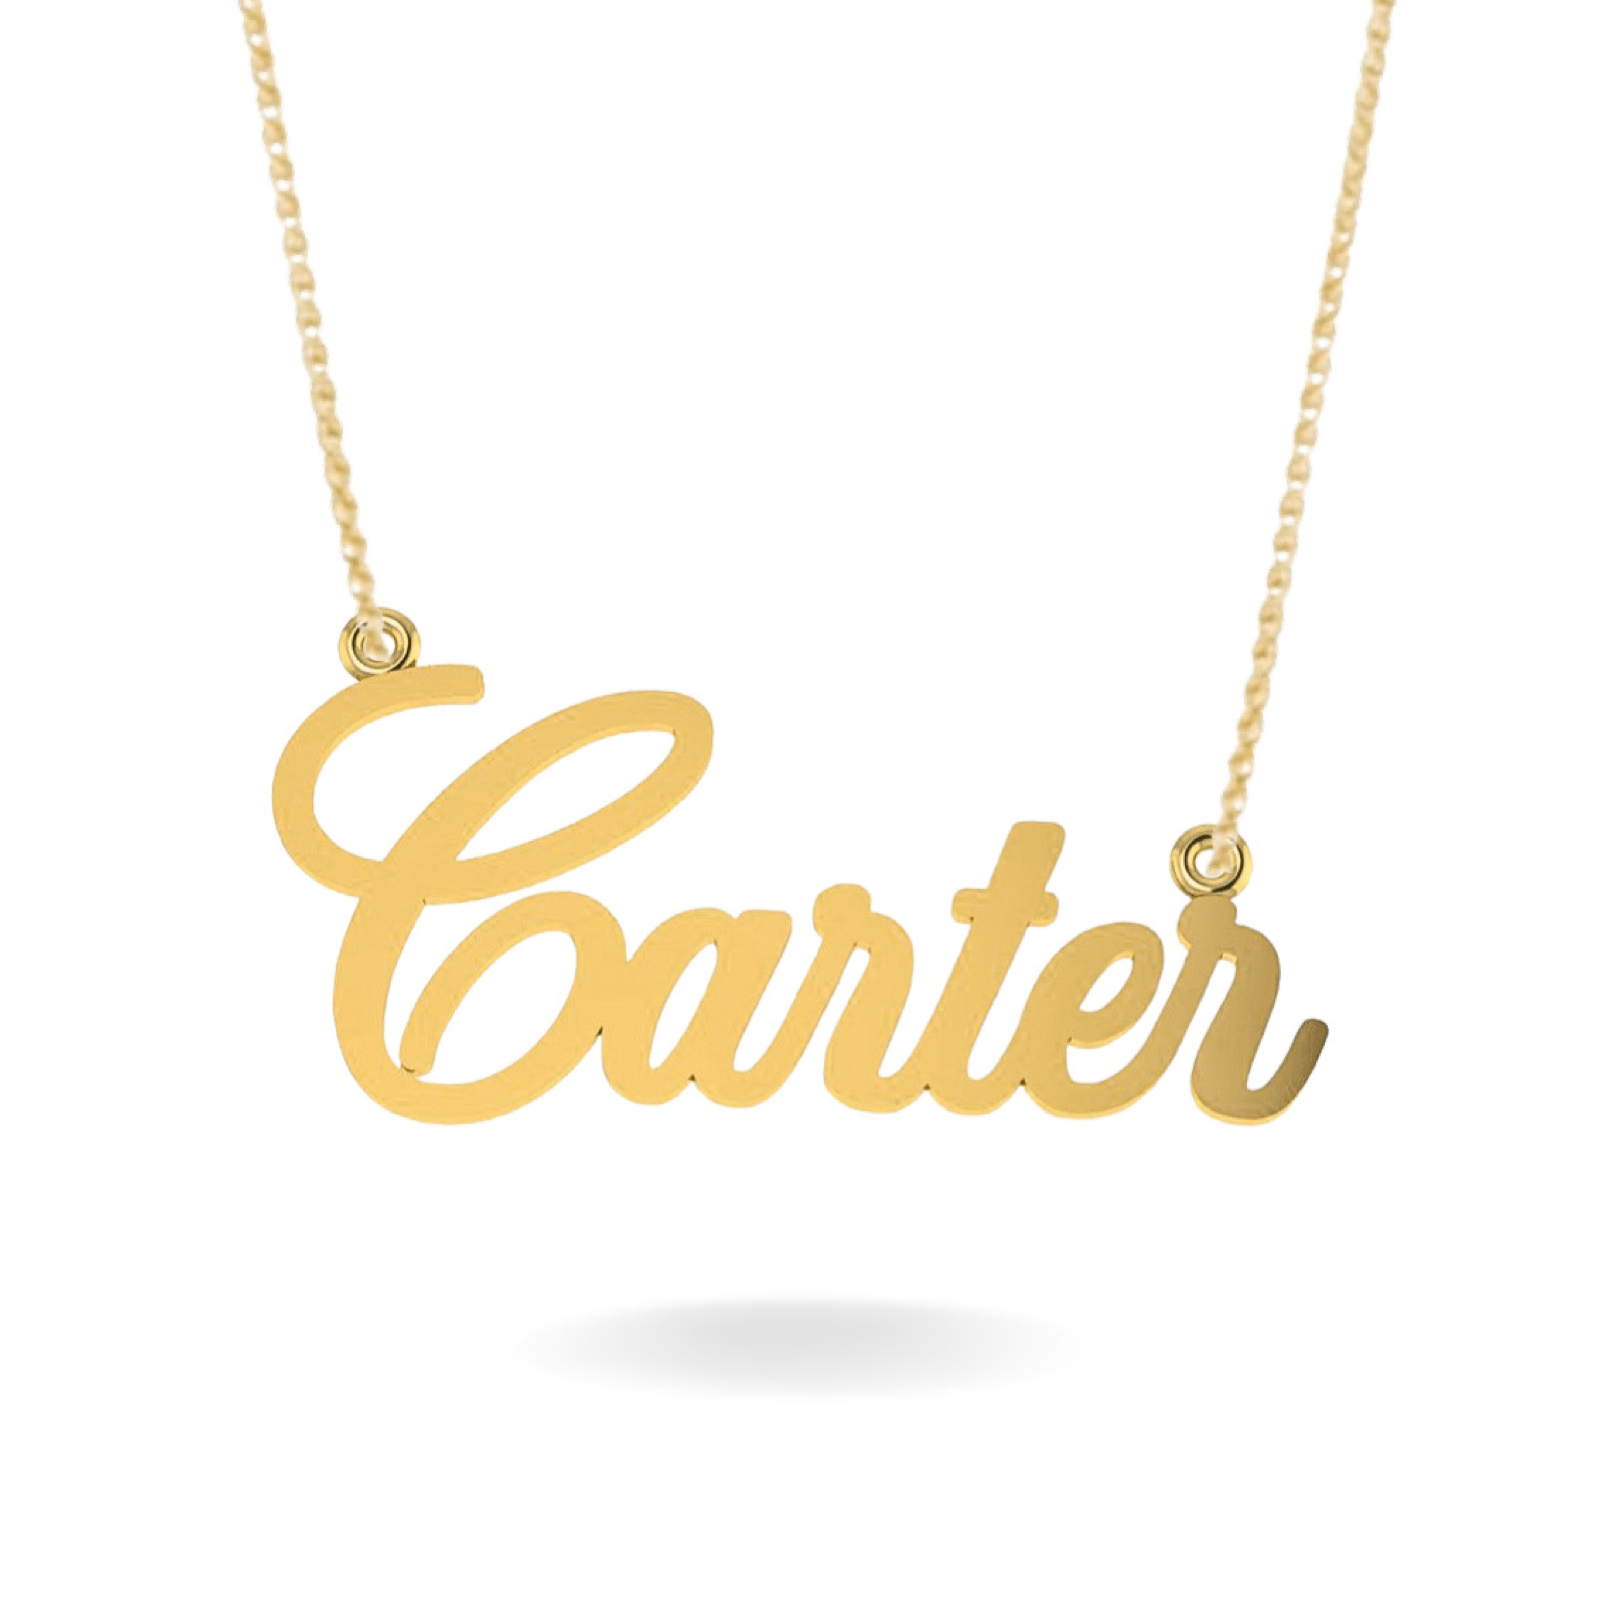 14K YELLOW GOLD ORIGINAL SCRIPT FLOATING NAME NECKLACE